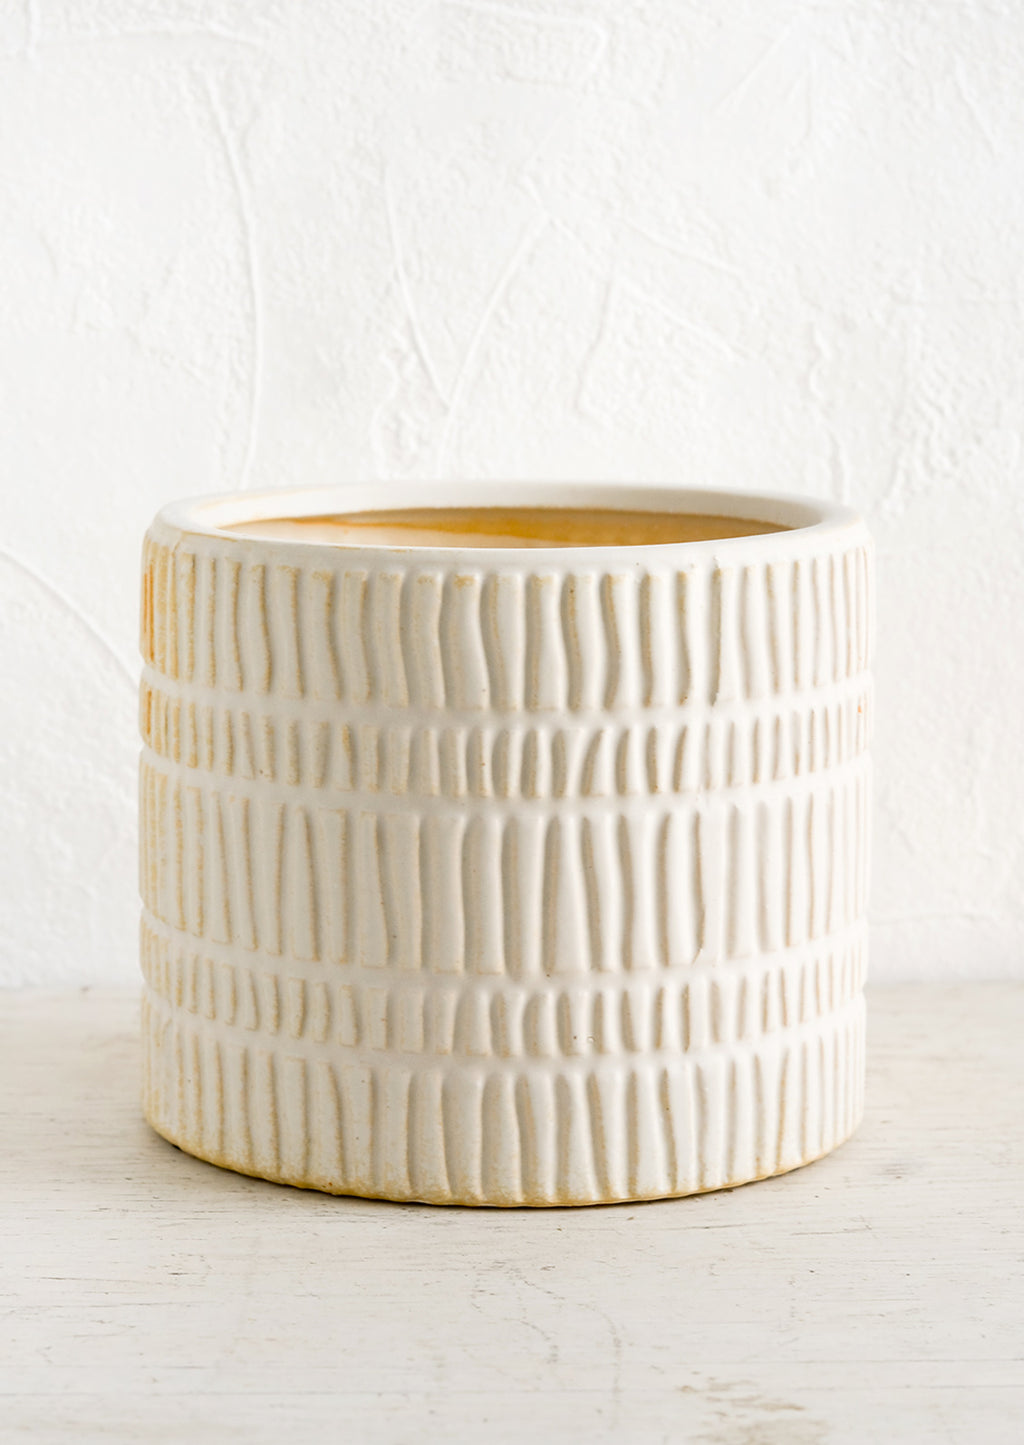 Large: A bisque ceramic planter with rows of raised line texture throughout.